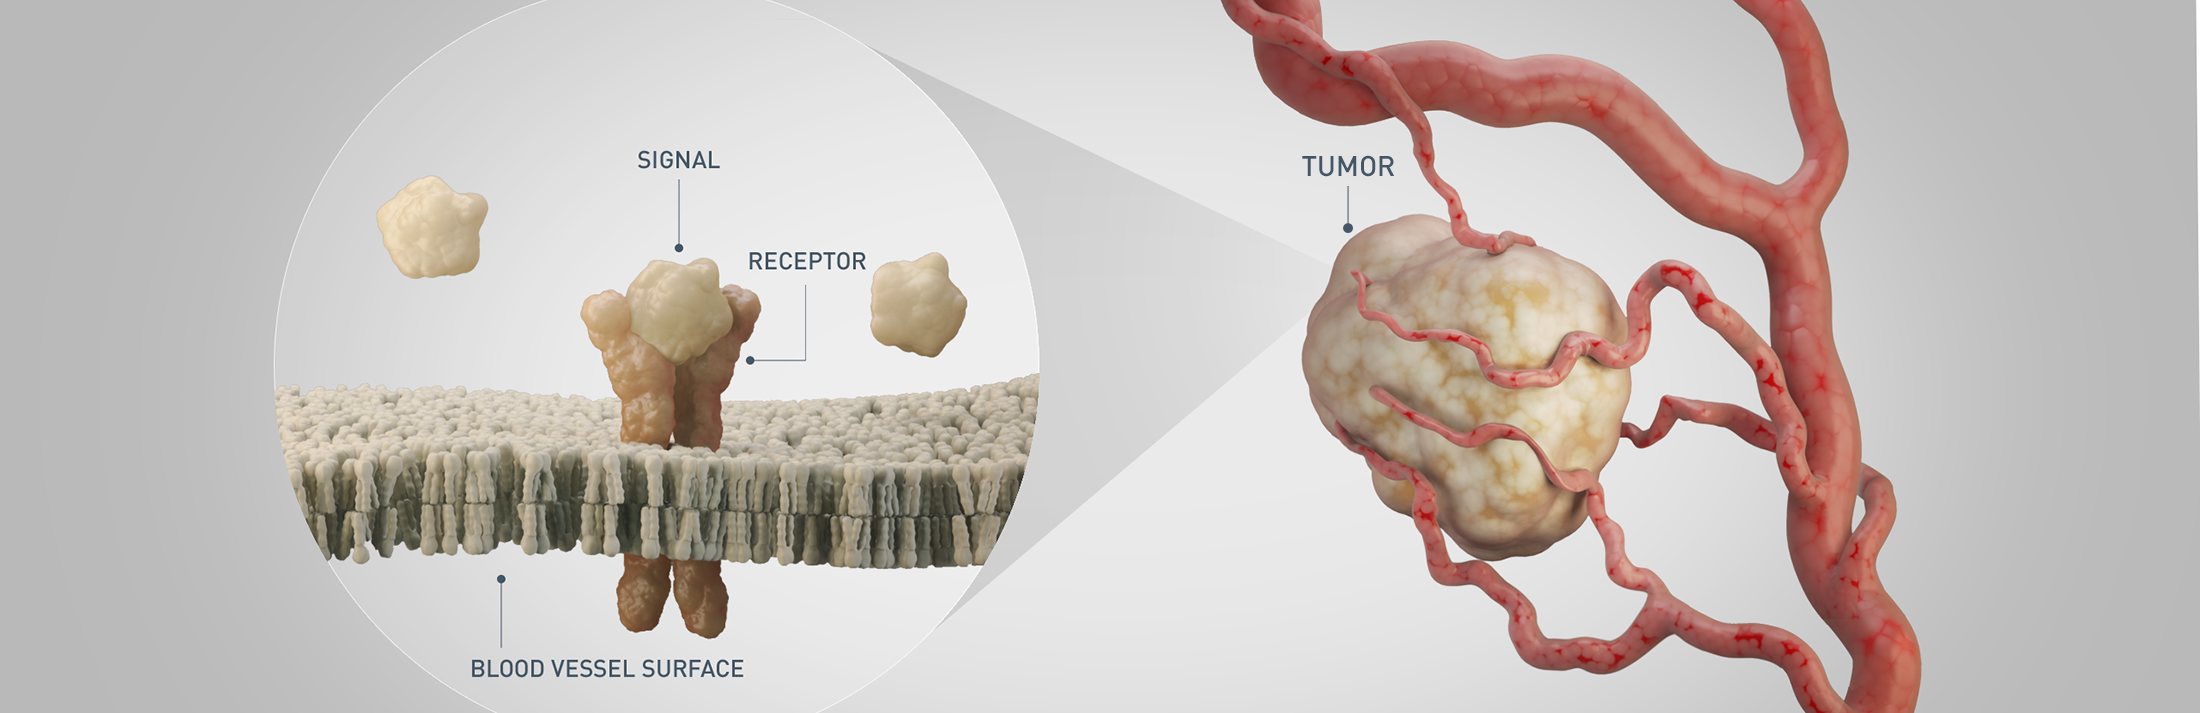 tumor without treatment